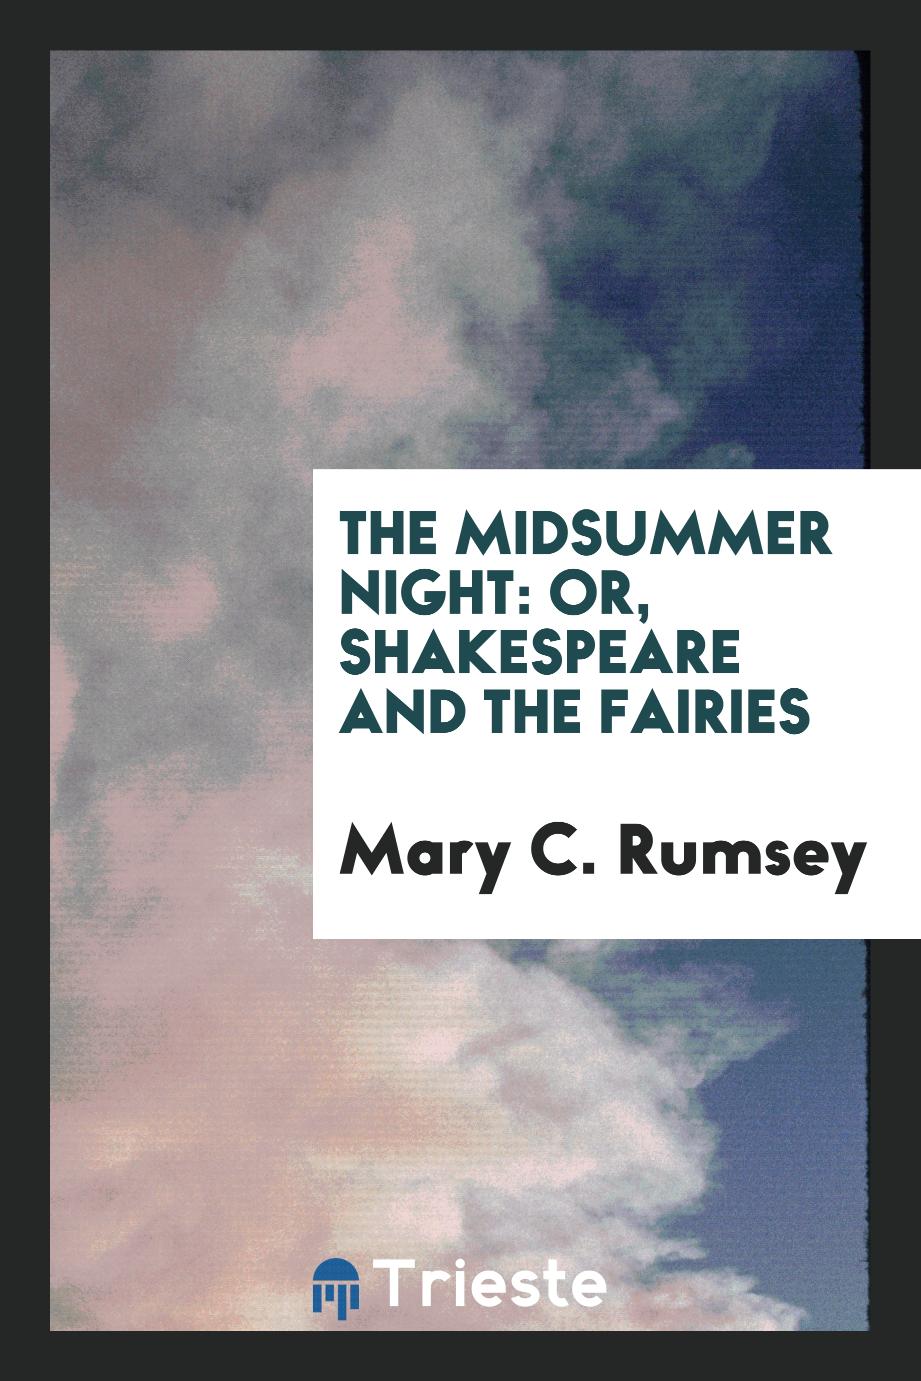 The Midsummer Night: Or, Shakespeare and the Fairies